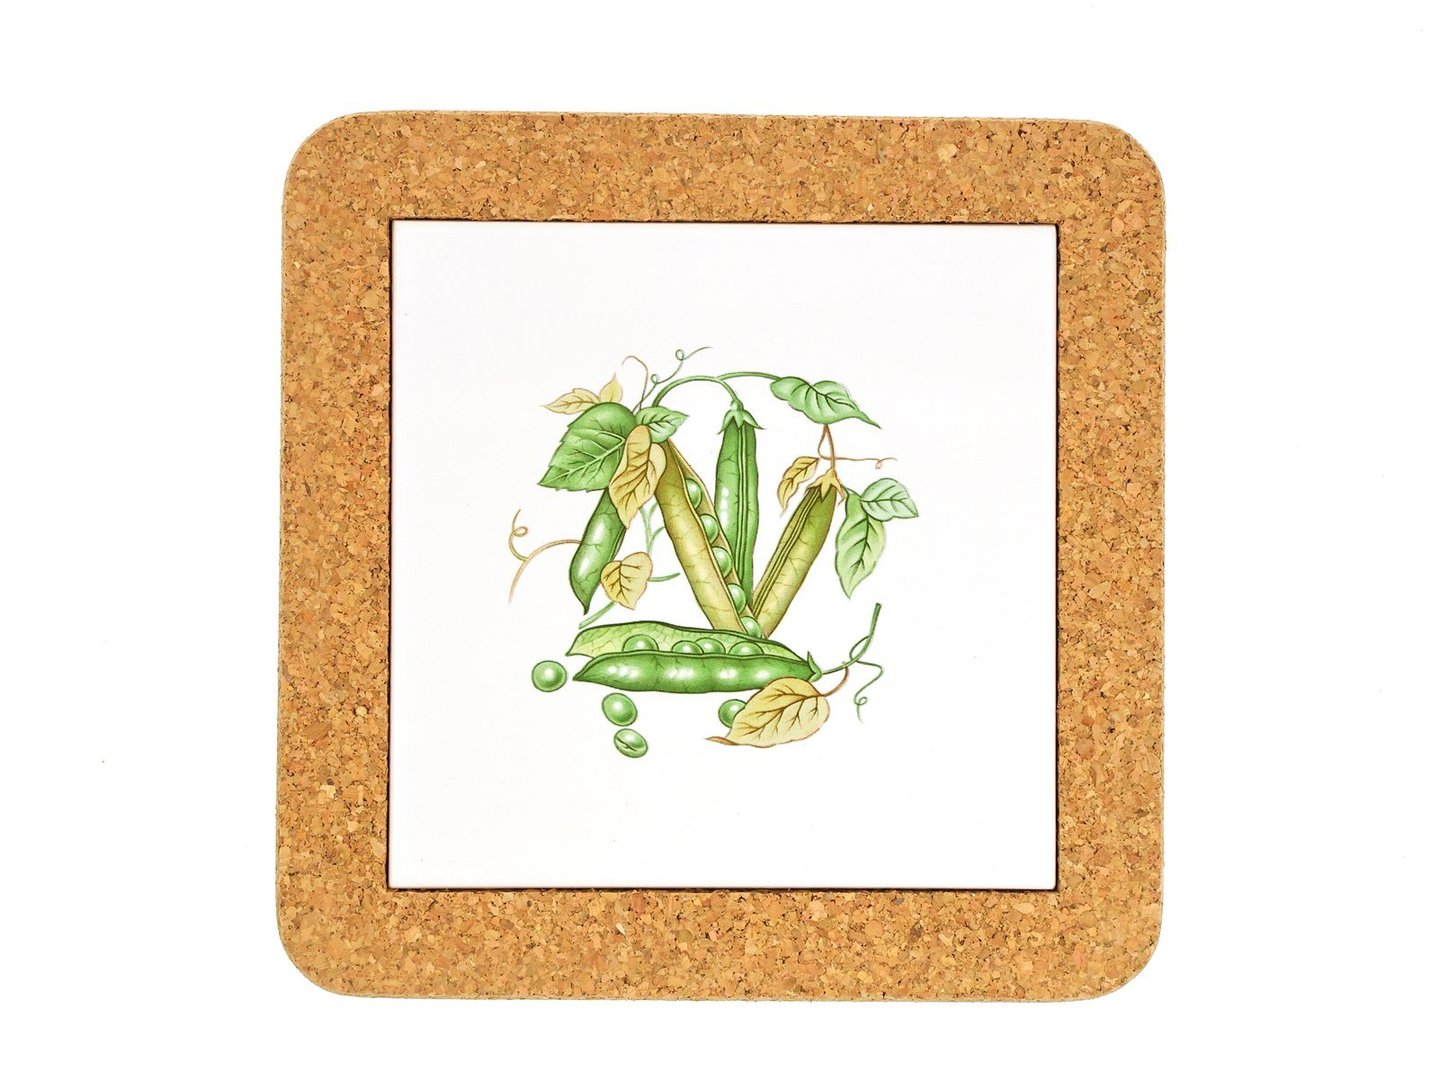 7900 Coaster With Tile Vegetable Pea